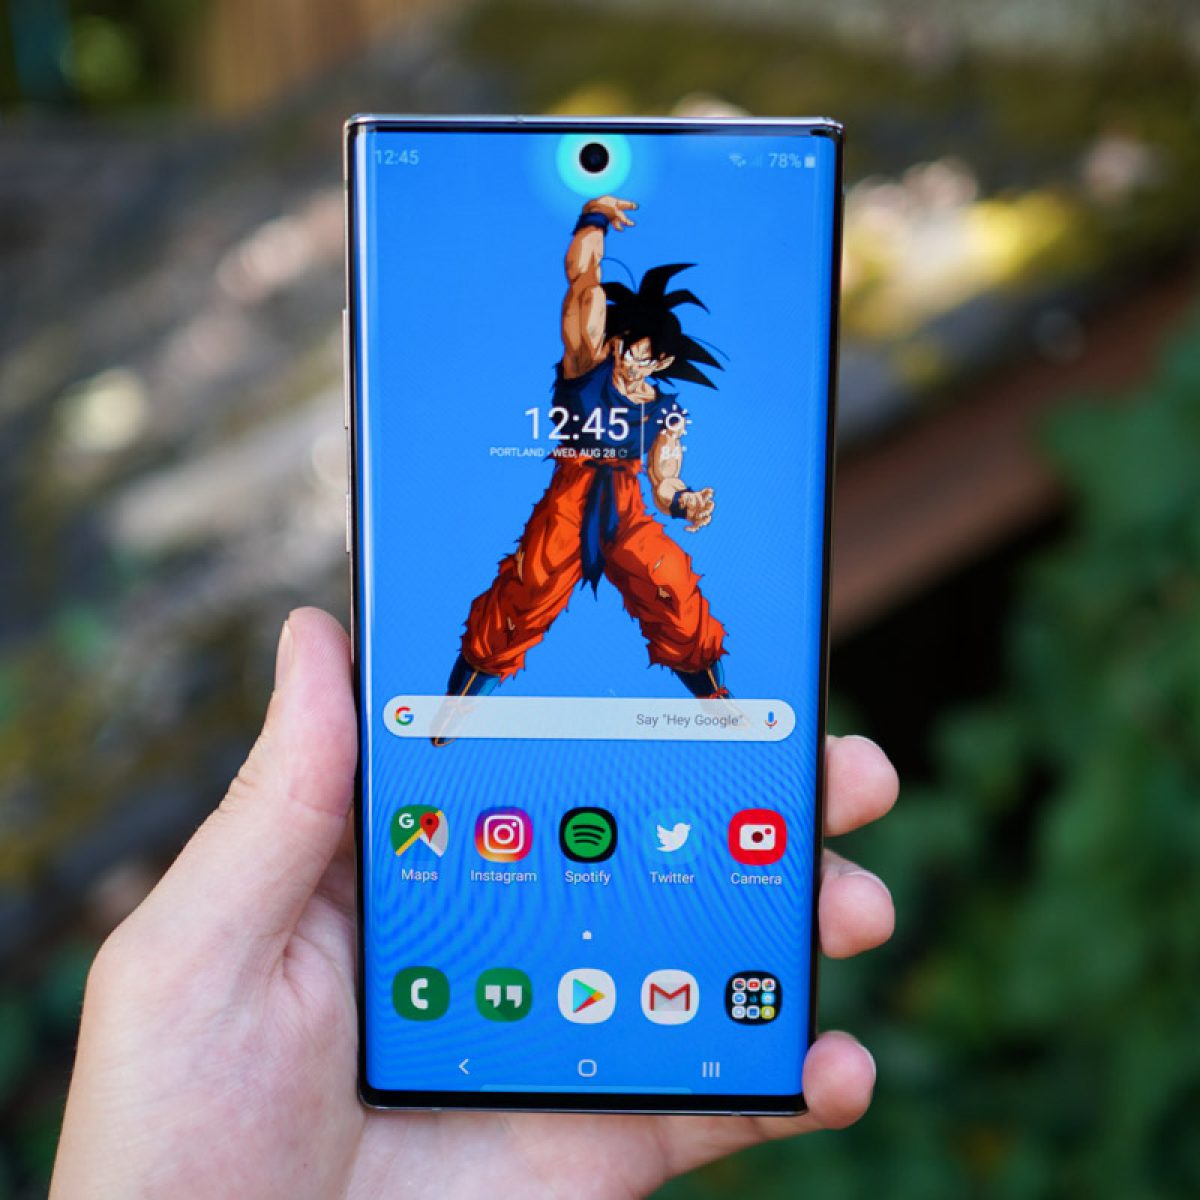 Galaxy Note 10 cutout wallpapers section live on the Galaxy Store   SamMobile